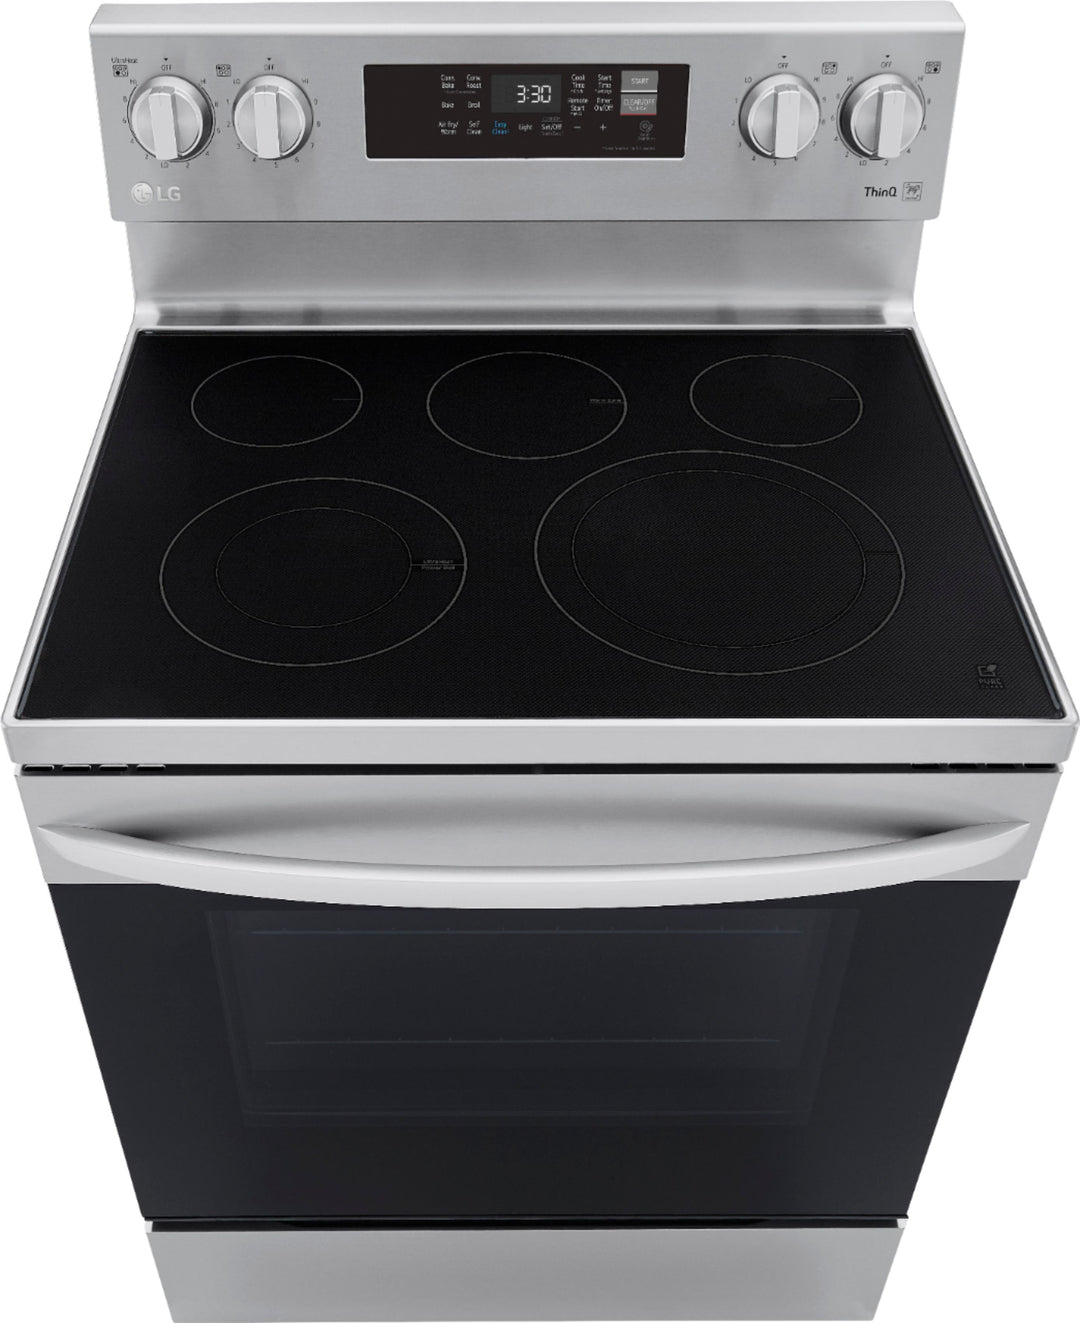 LG - 6.3 Cu. Ft. Smart Freestanding Electric Convection Range with EasyClean, Air Fry and InstaView - Stainless steel_9